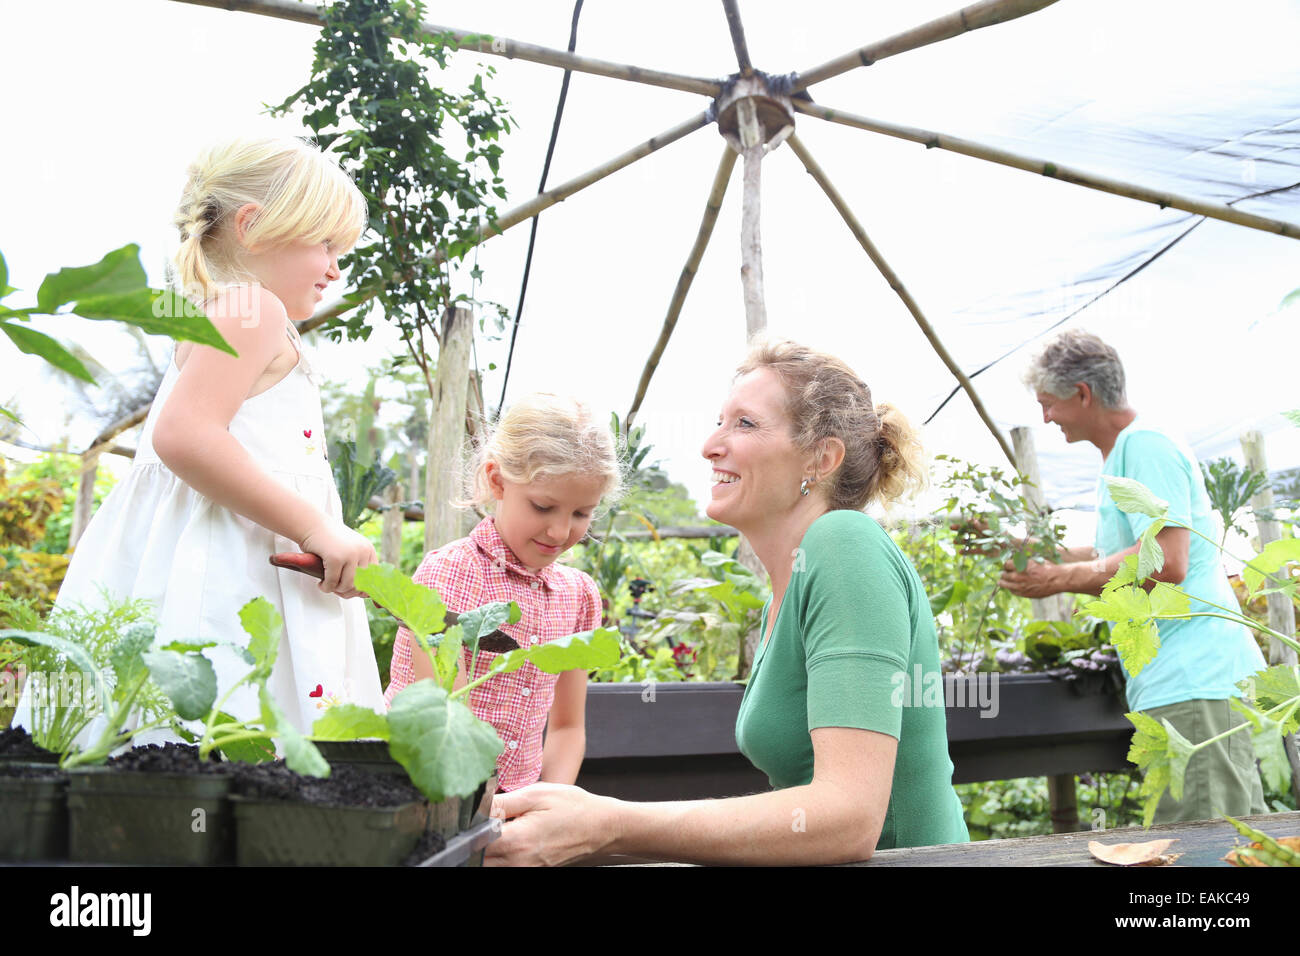 Two women working in greenhouse with girls Stock Photo